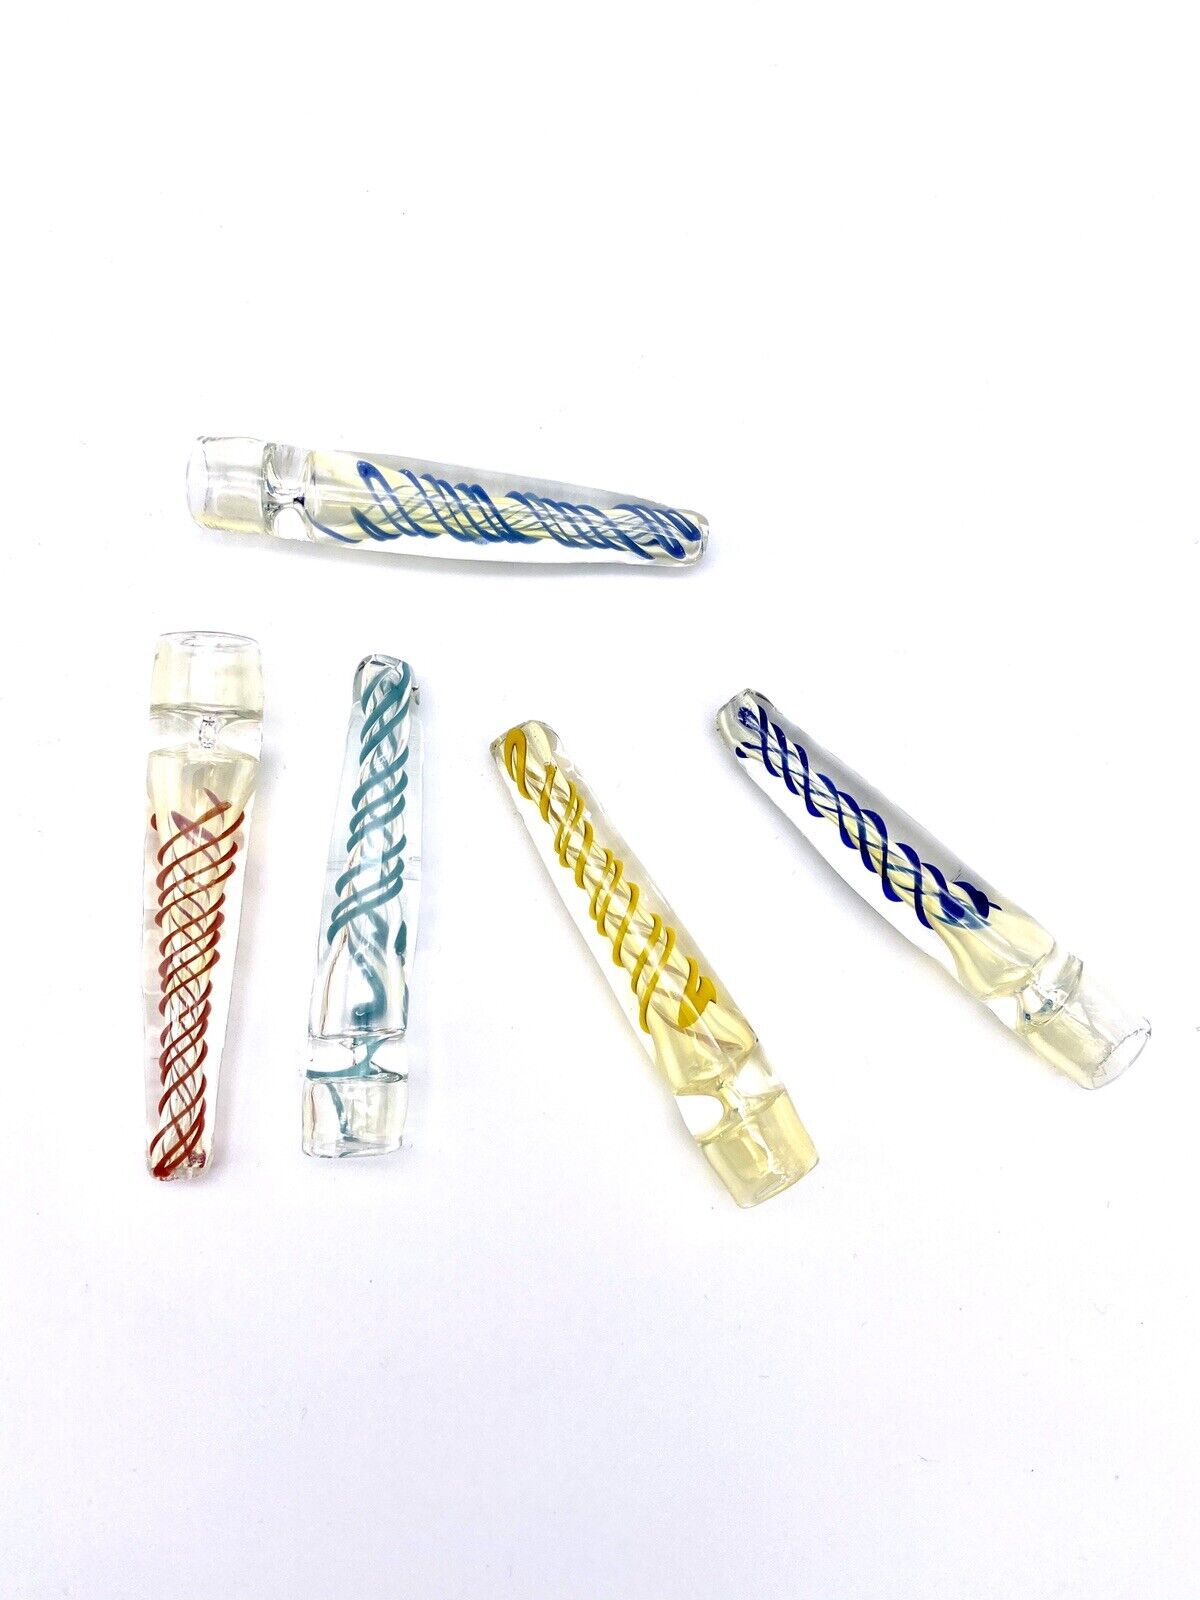 SET OF 2 CHILLUMS BEST QUALITY GLASS 2.5”- 3“ ONE HITTER TOBACCO ASSORTED DESIGN